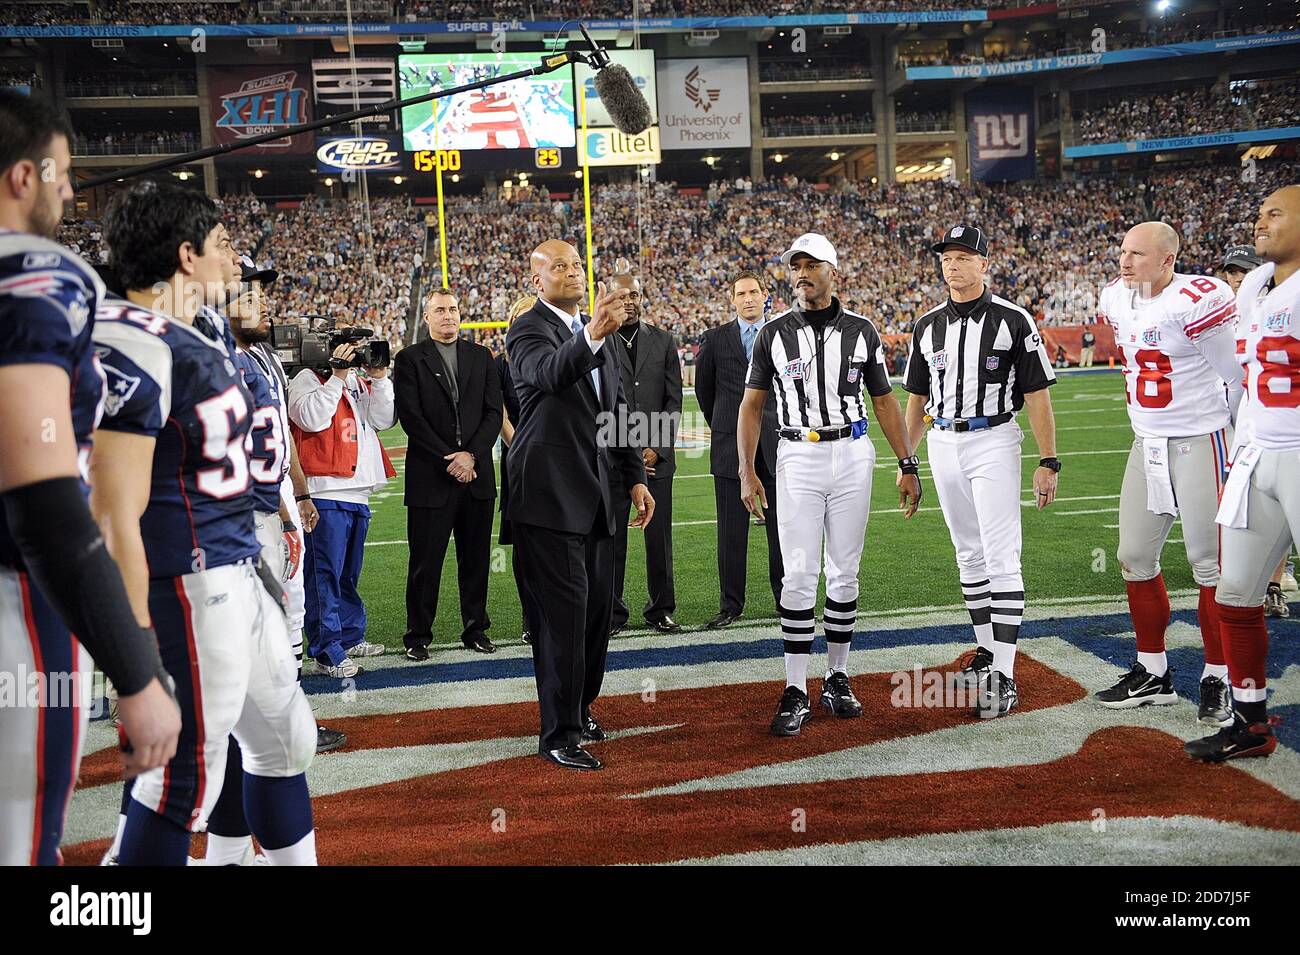 Ronnie Lott performs the coin toss prior to Super Bowl XLII at University of Phoenix Stadium in Glendale, AZ, USA on February 3, 2008.  The NY Giants won 17-14. Photo by Karl Mondon/MCT/Cameleon/ABACAPRESS.COM Stock Photo